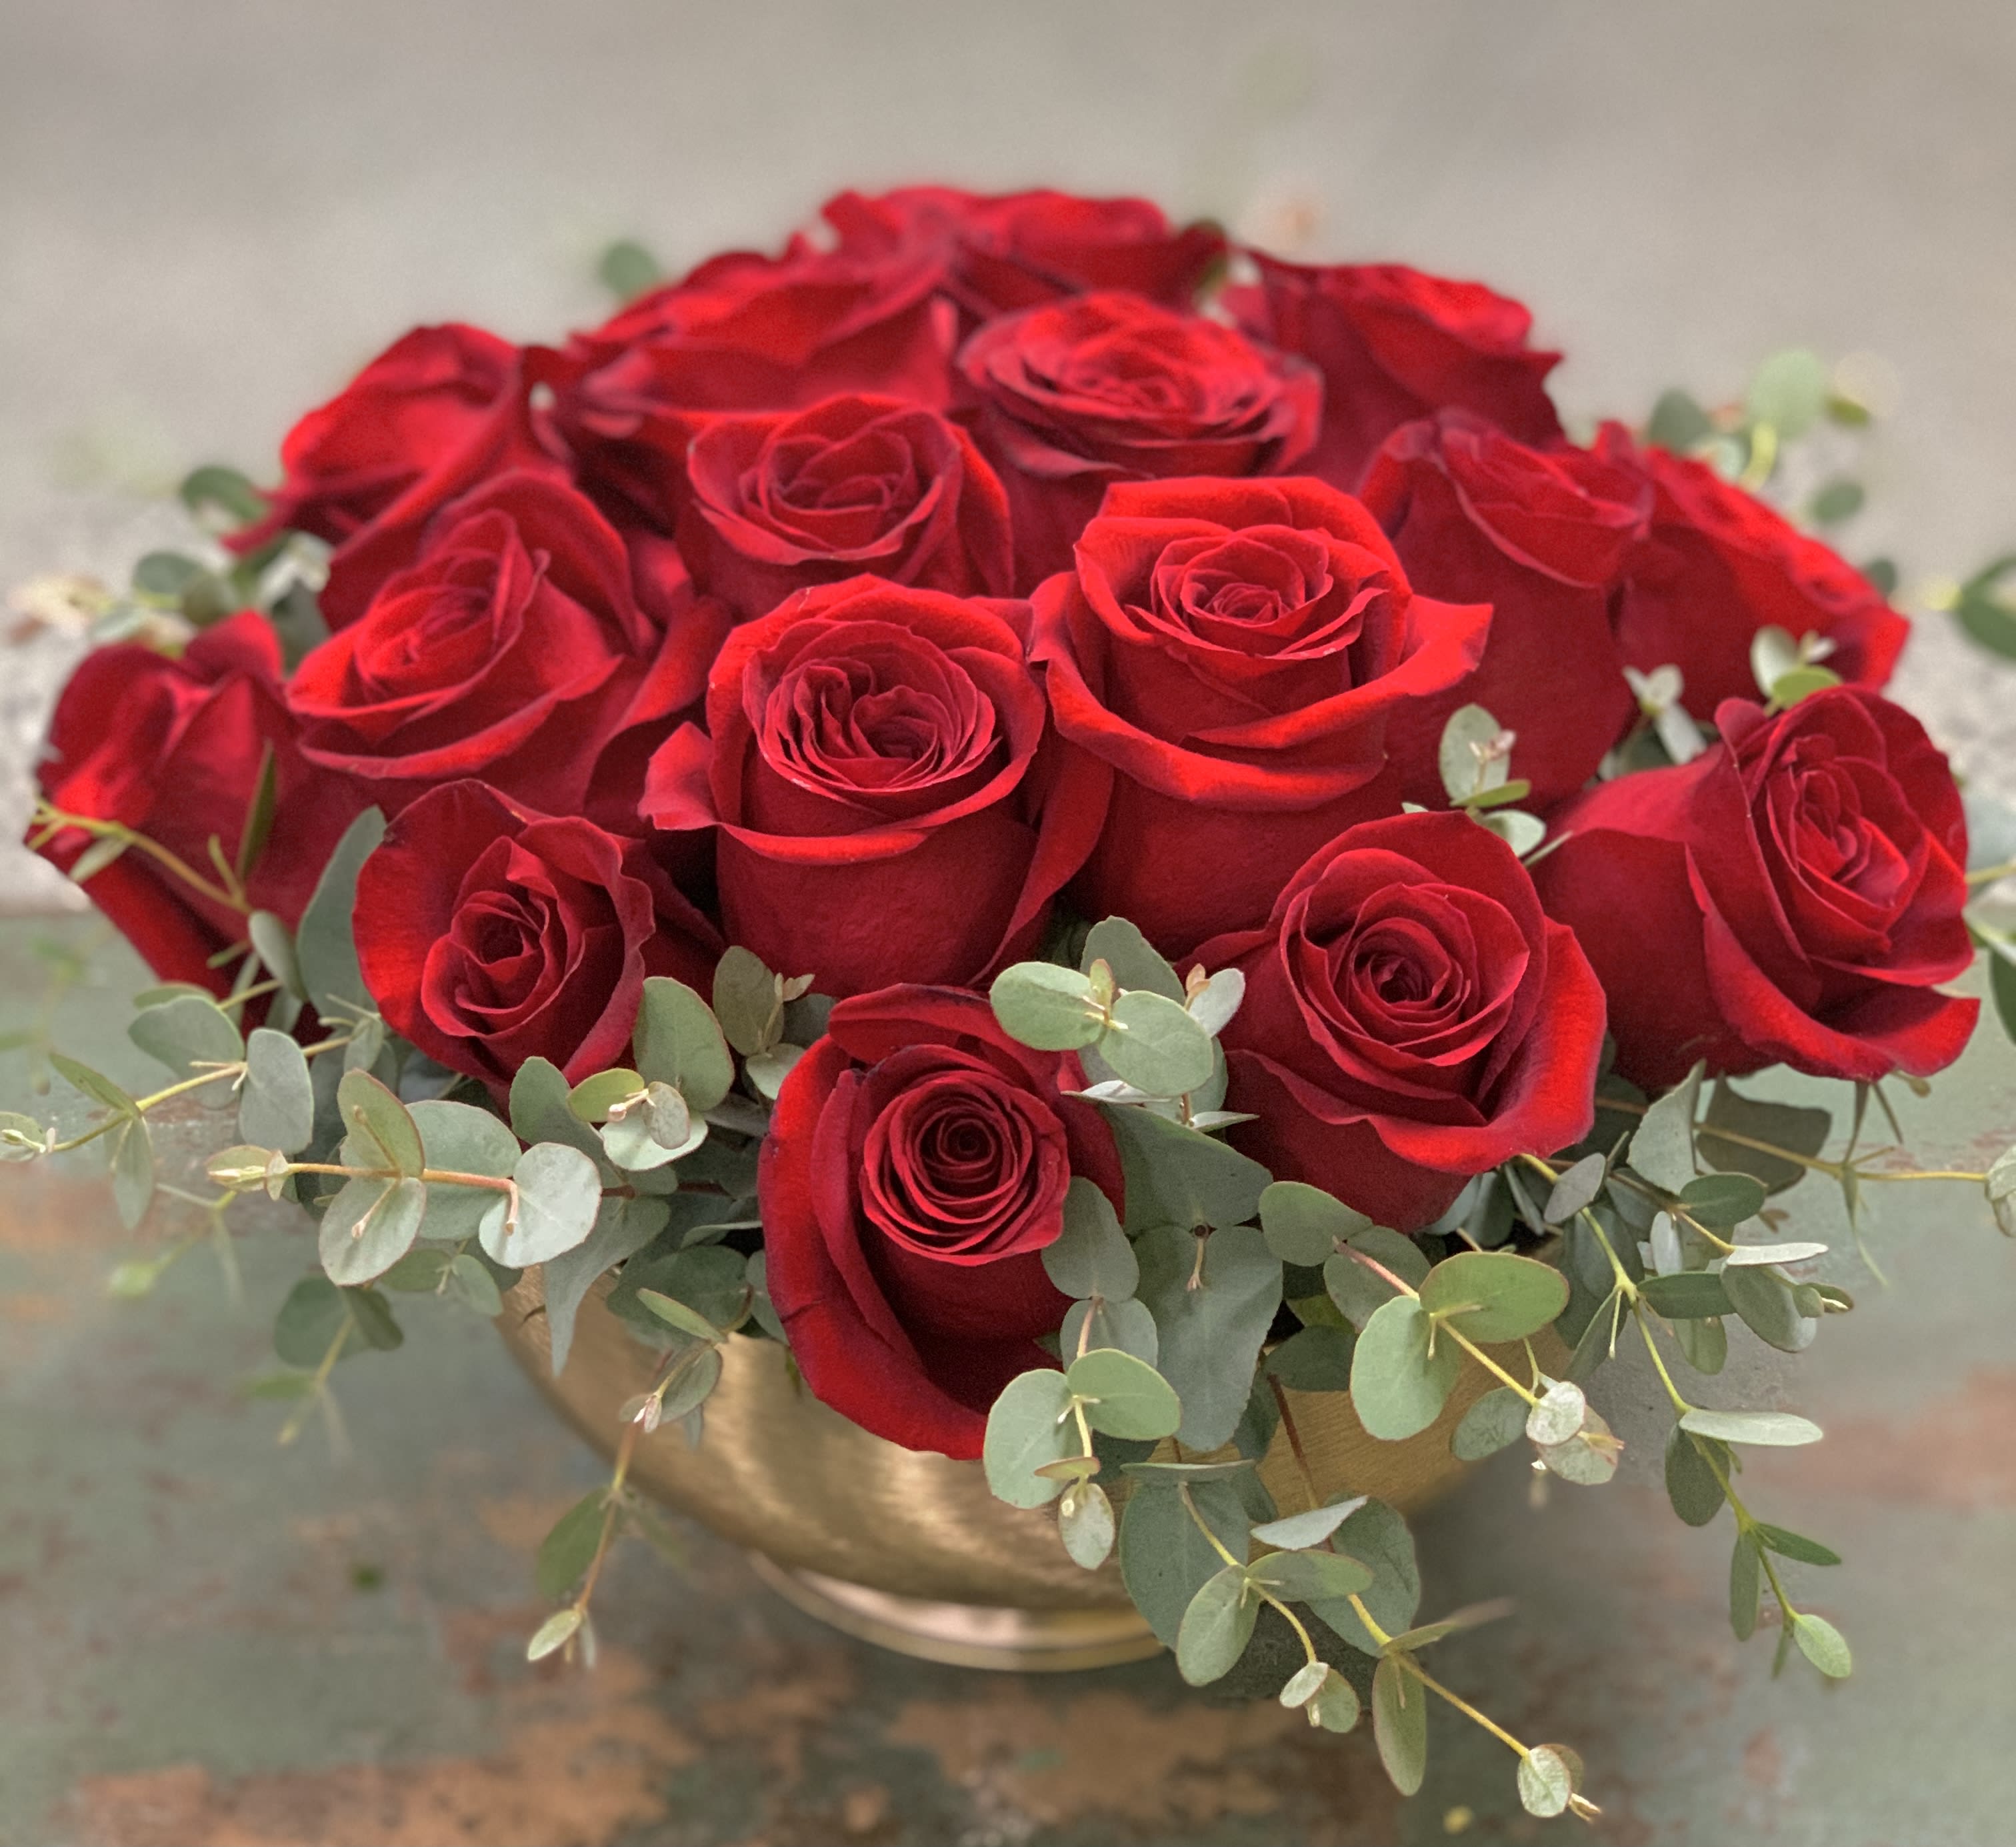 Isn’t it Romantic - Looking for romance? This brand new Valentine’s Day design is just the answer. Featuring 24 premium red roses artfully designed in a beautiful, gold pedestal container. Romantic and contemporary, this stunner will ensure a night to remember!